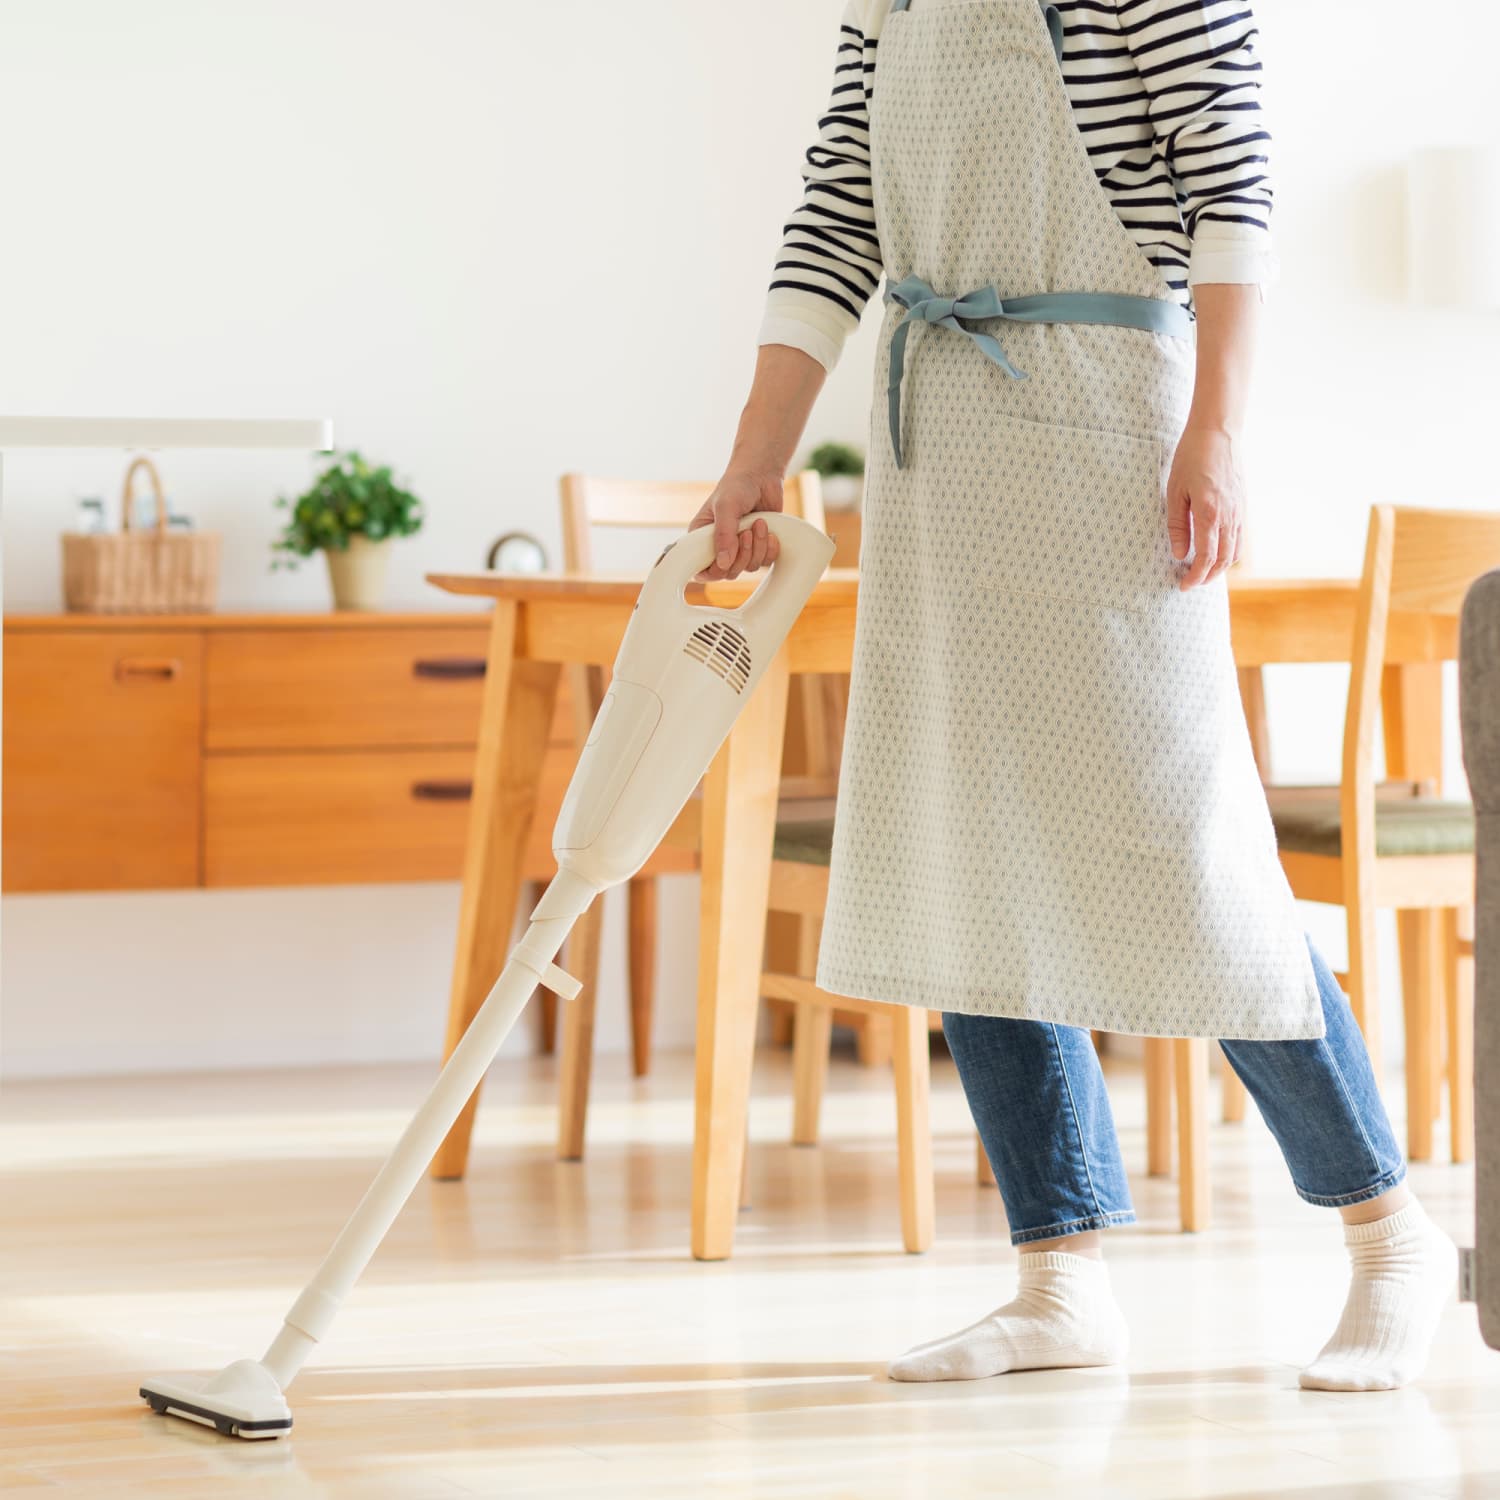 Enjoy a Compact Lightweight Vacuum Cleaner for a Sparkling Clean